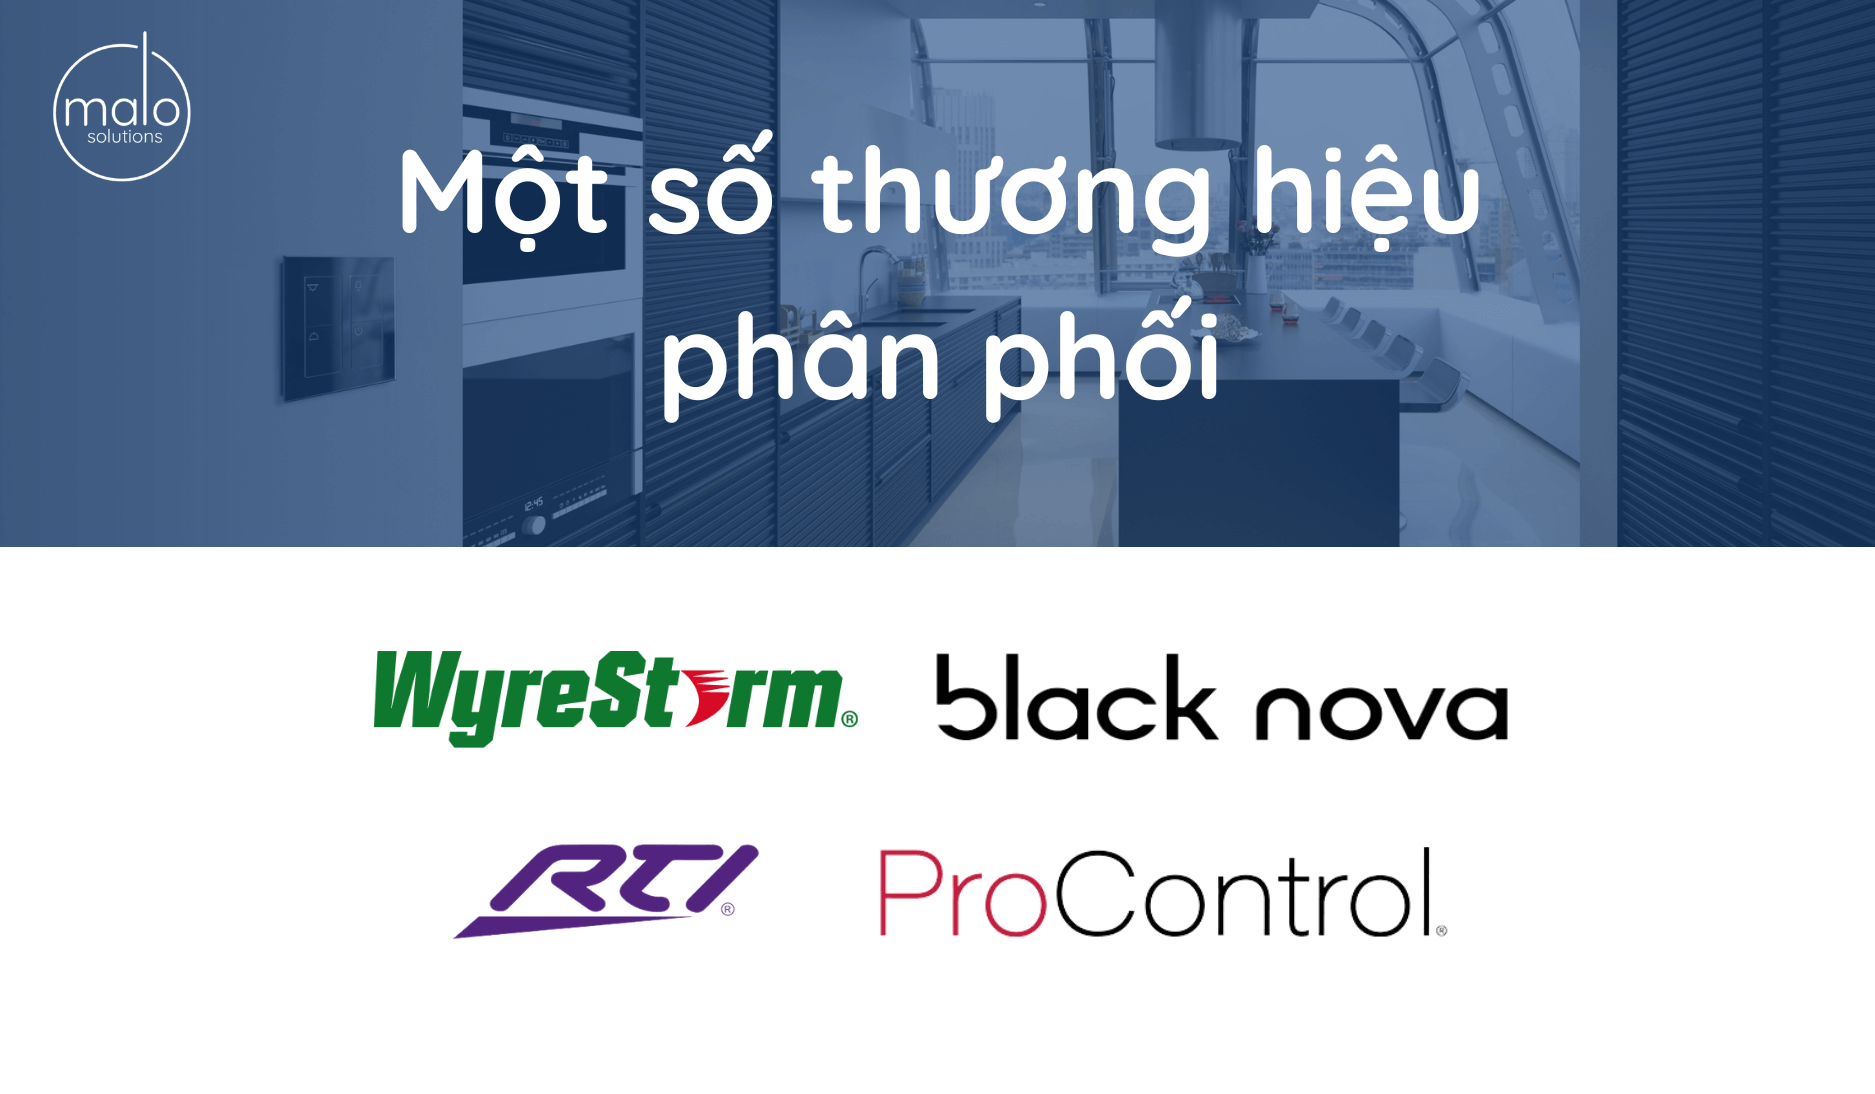 Some brands we represent in Vietnam | malo solutions